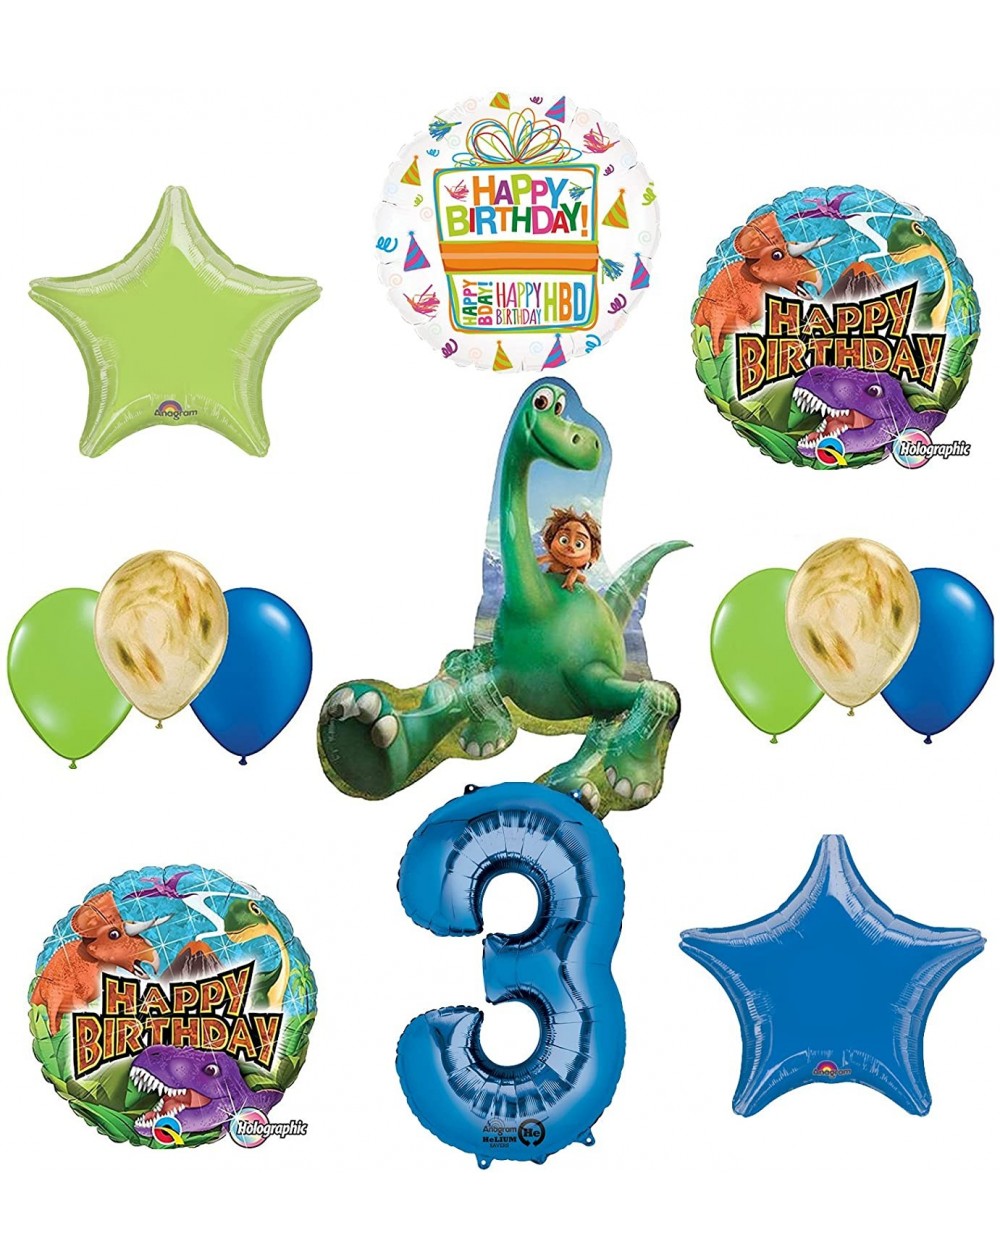 Balloons Arlo and Spot The Good Dinosaur 3rd Birthday Party Supplies and Balloon Decorations - C6183N8AI35 $34.55